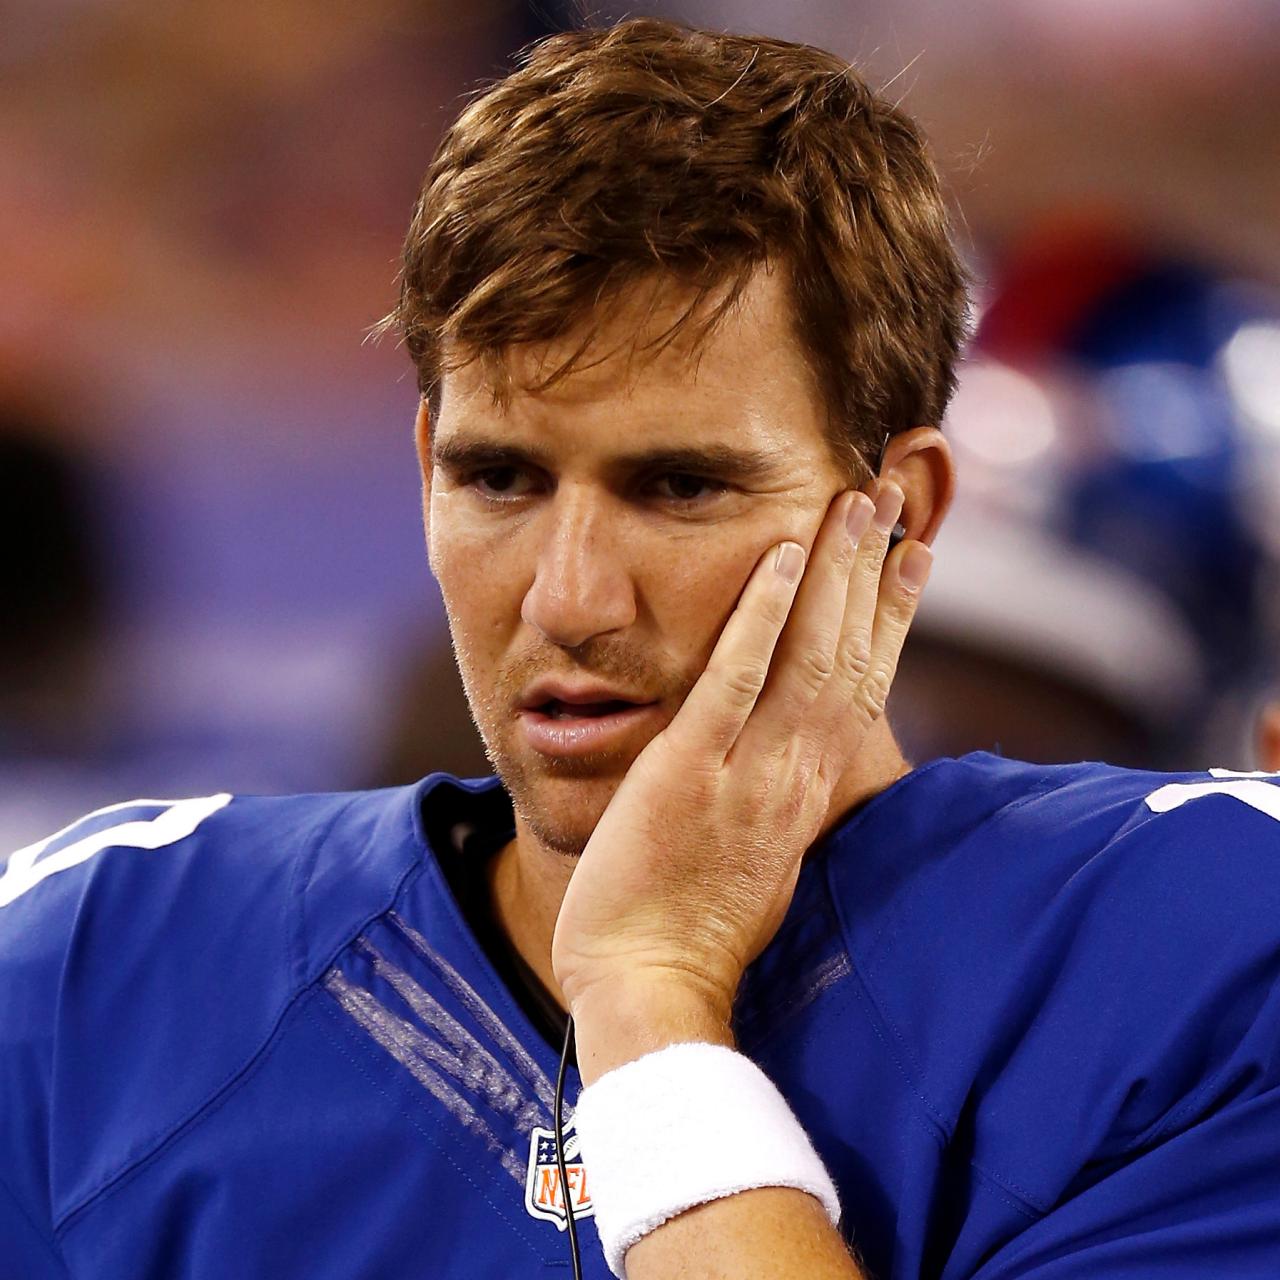 Eli Manning always gets caught with the weirdest face #fyp